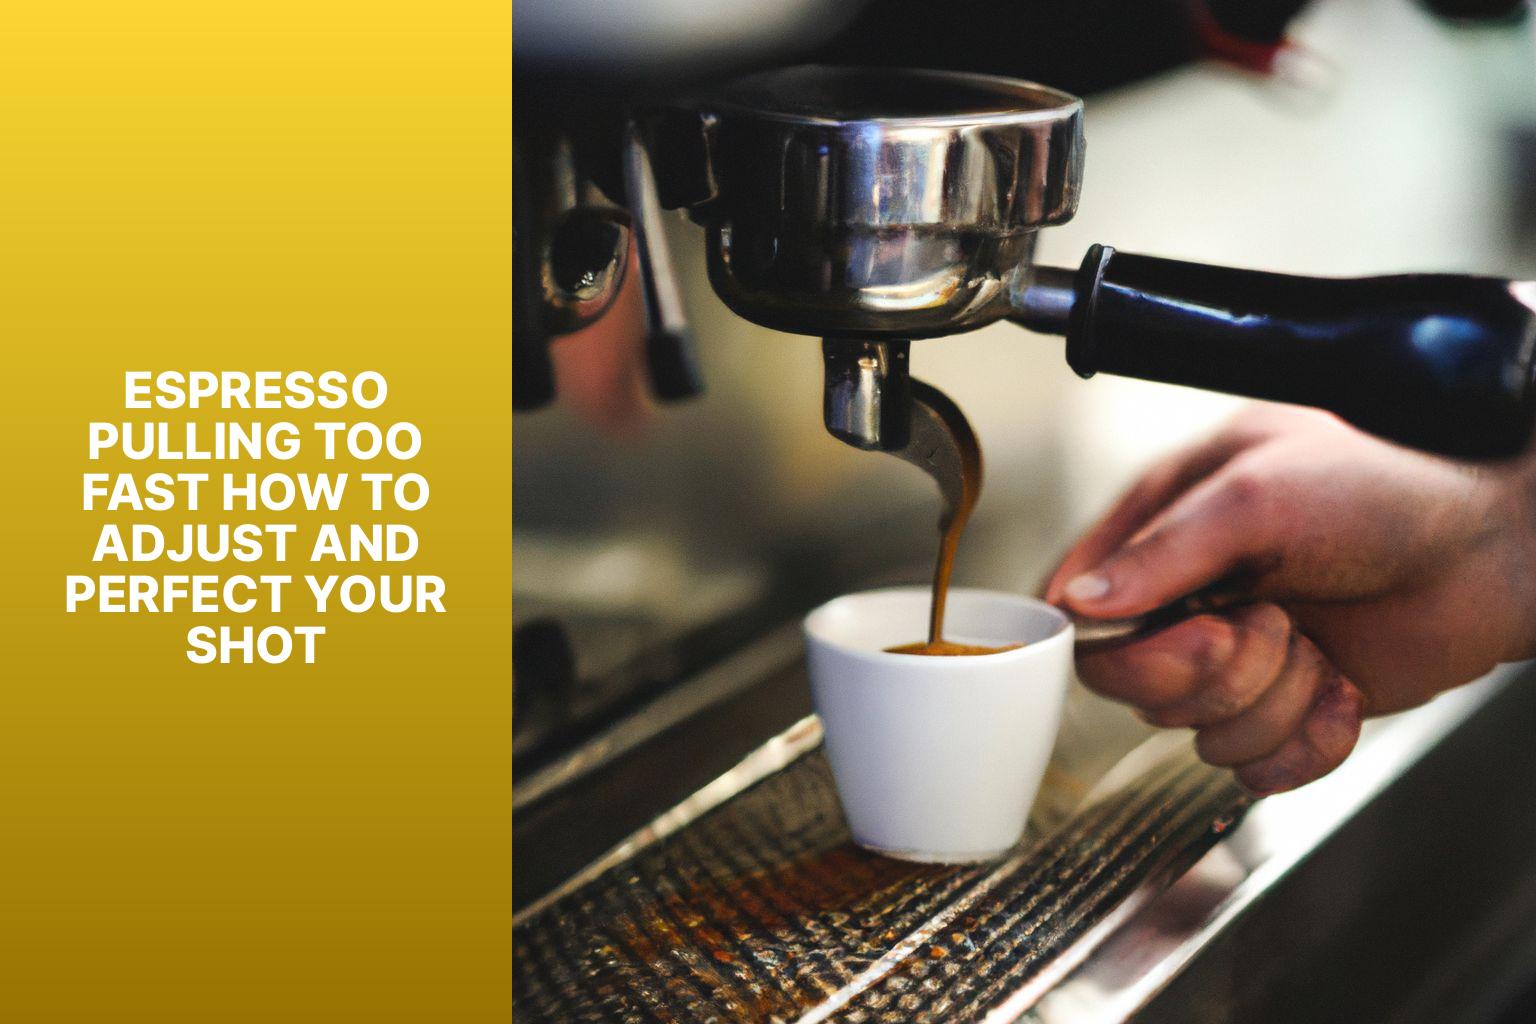 Espresso Pulling Too Fast? How to Adjust and Perfect Your Shot